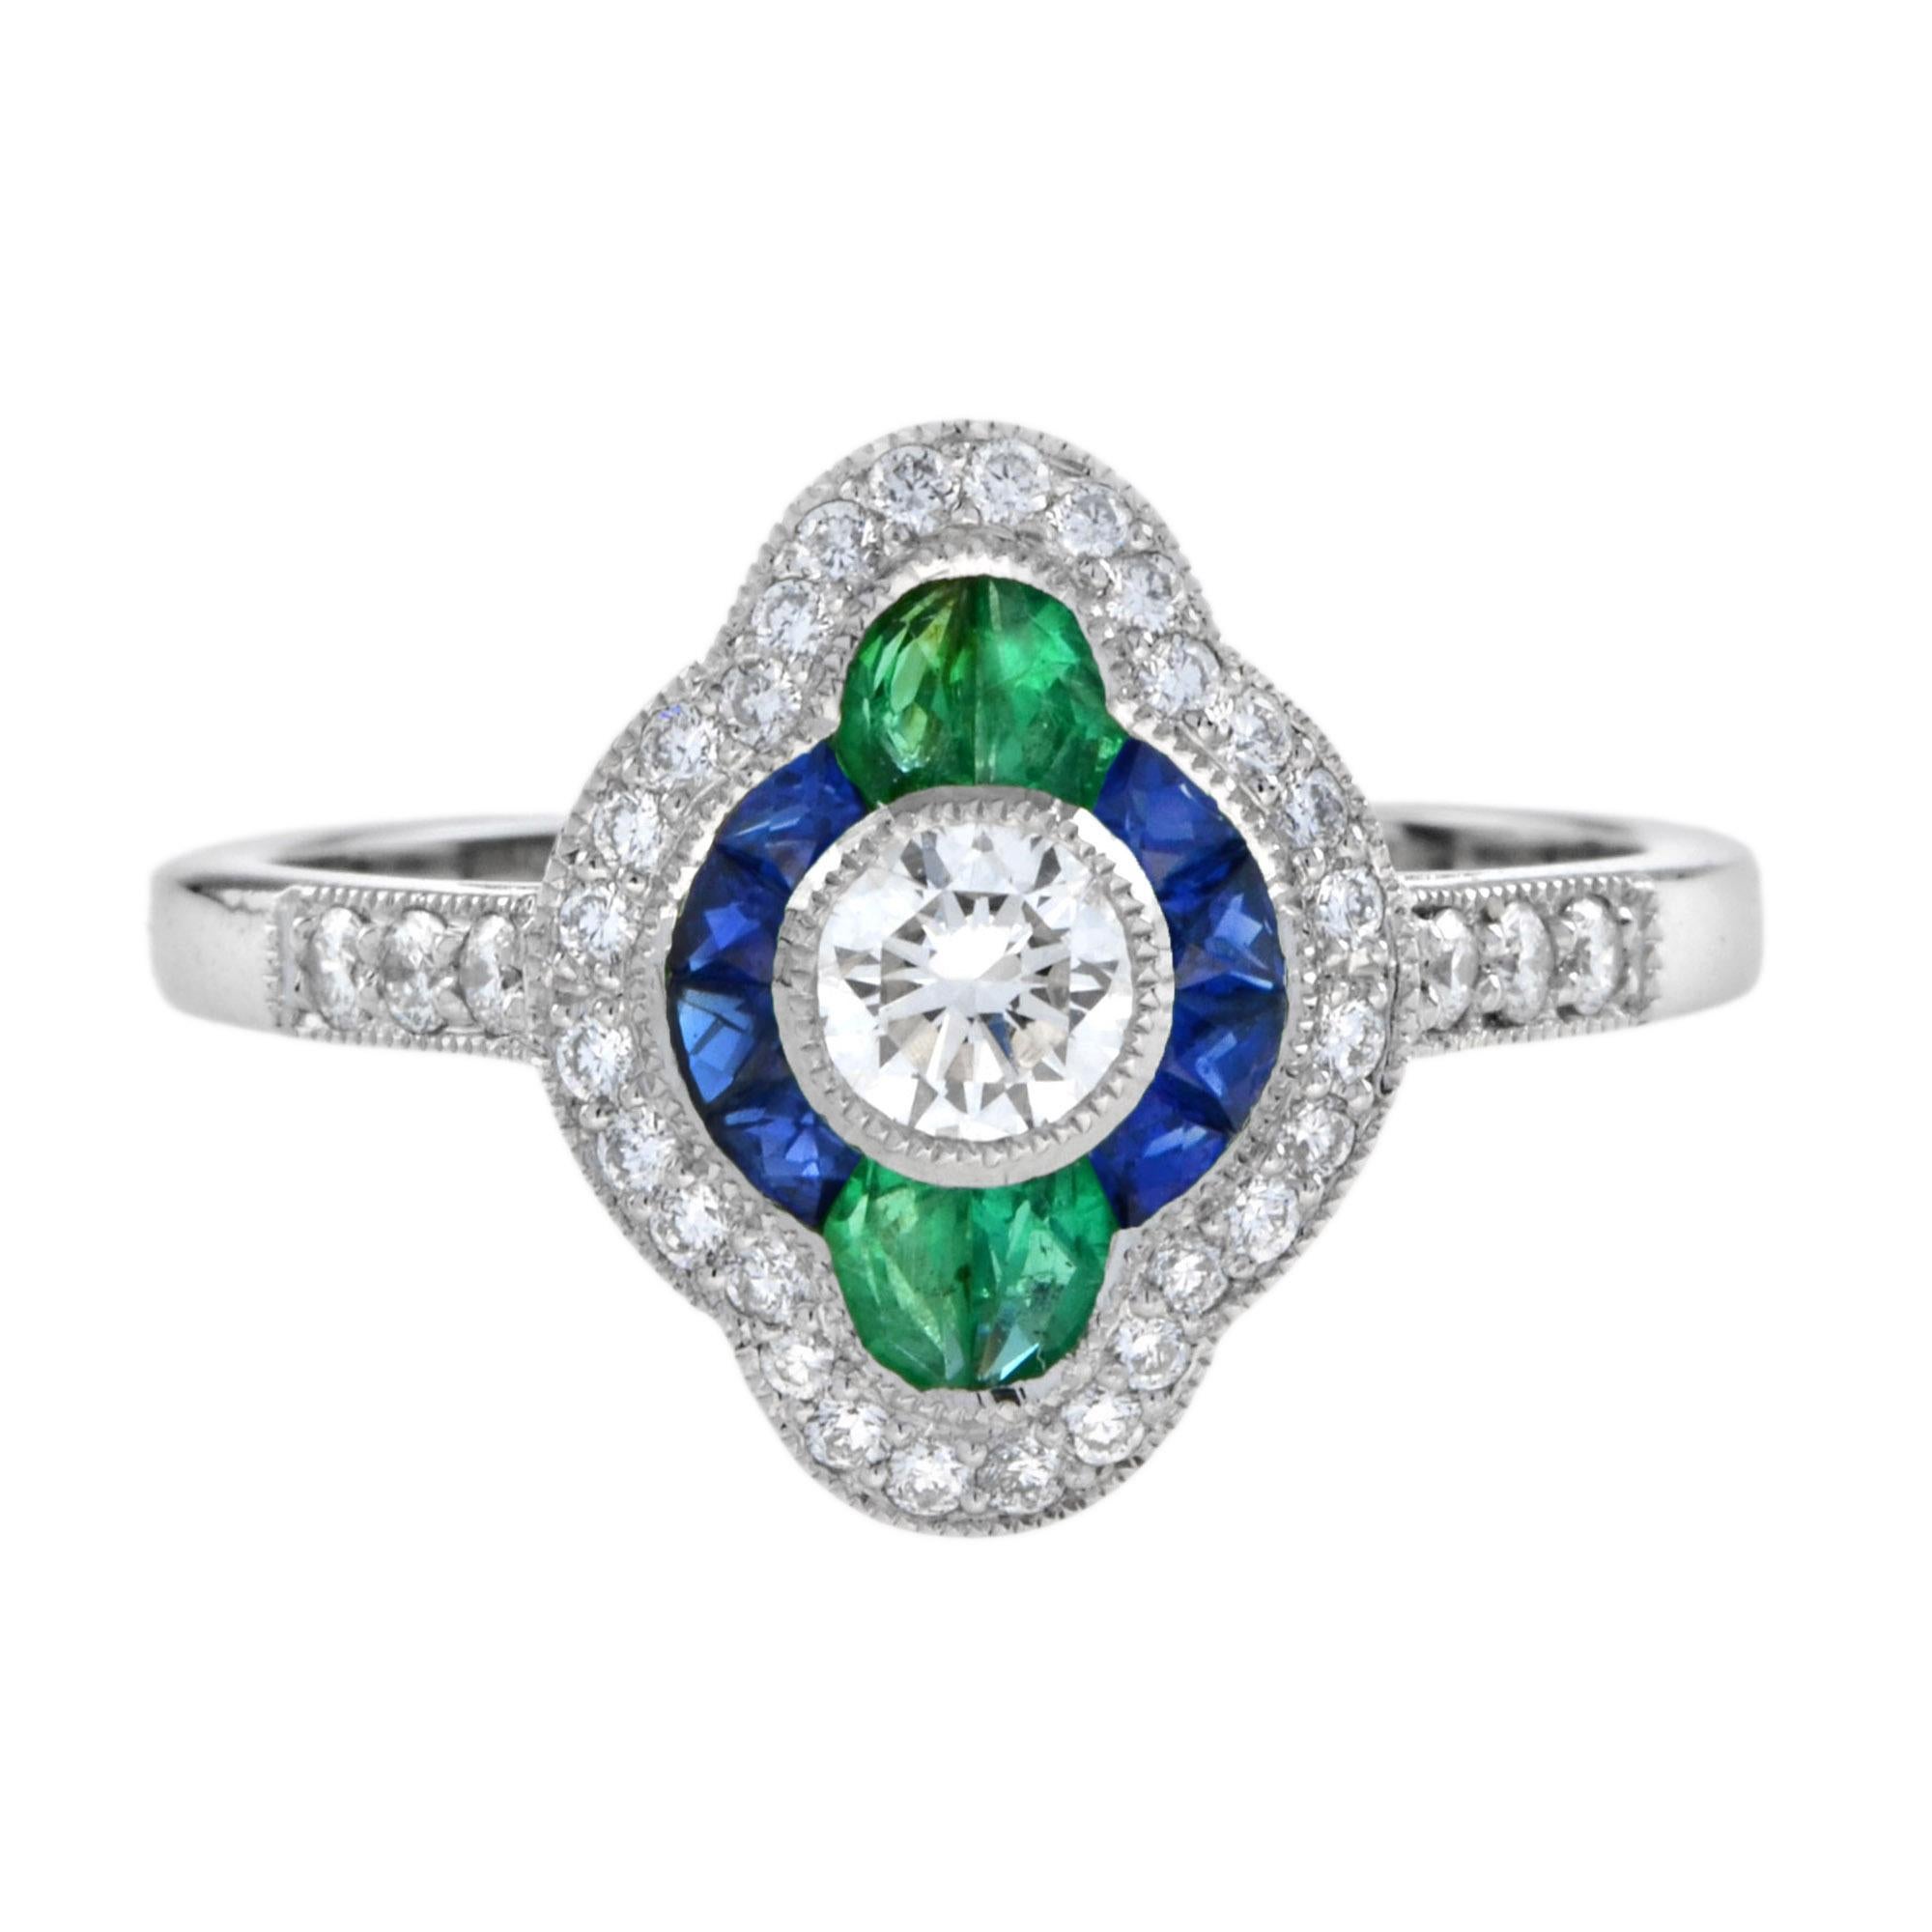 For Sale:  Diamond Sapphire Emerald Art Deco Style Engagement Ring in 18k White Gold 2